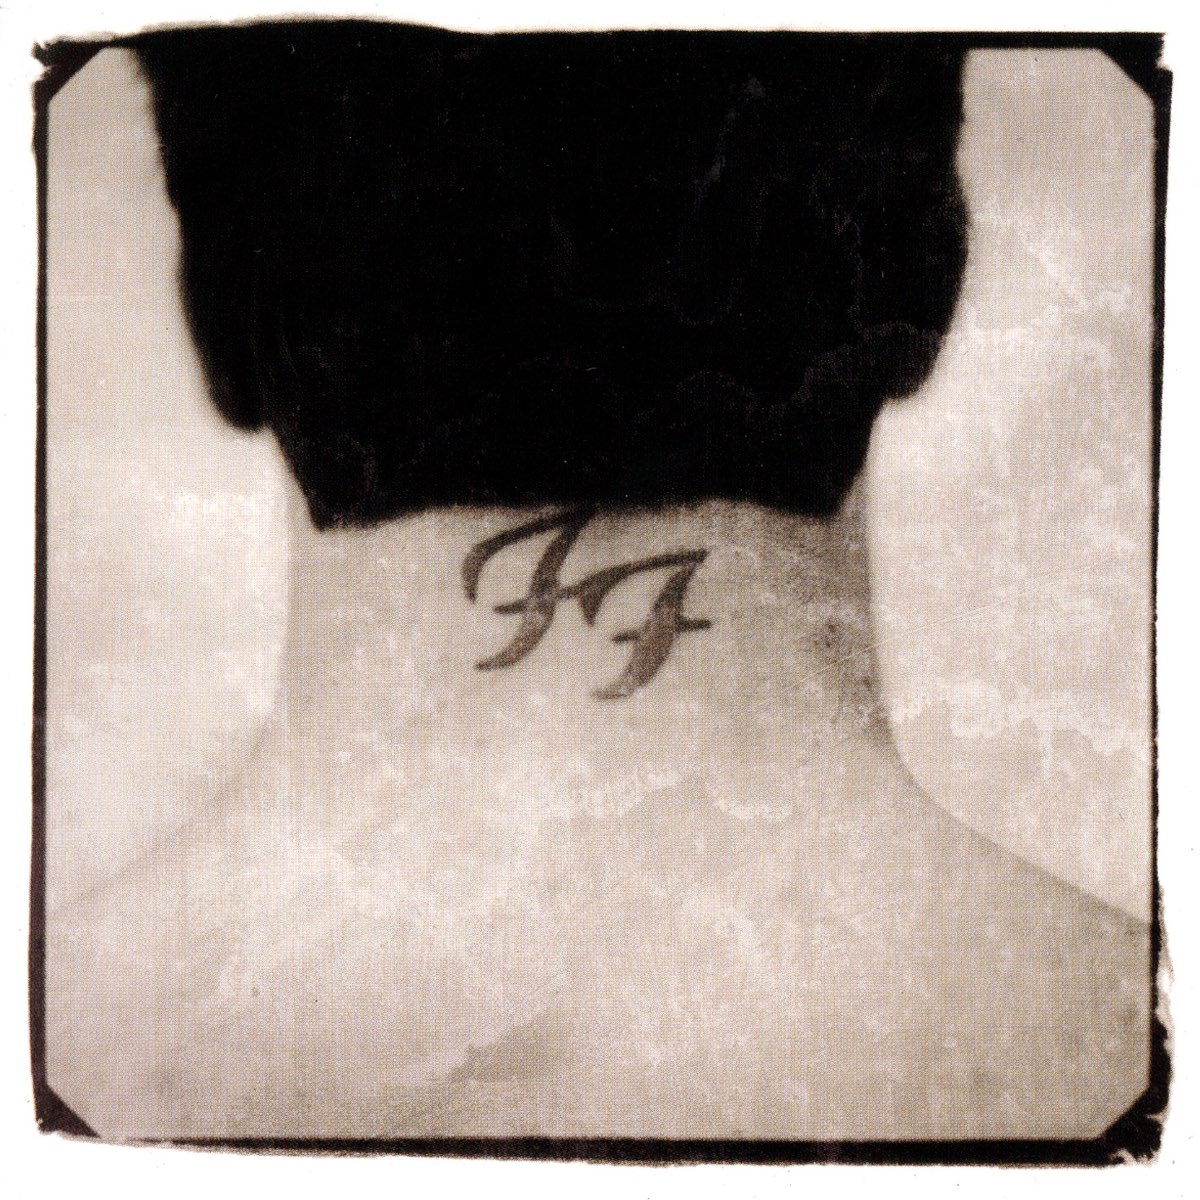 ‎There Is Nothing Left to Lose - Album by Foo Fighters - Apple Music